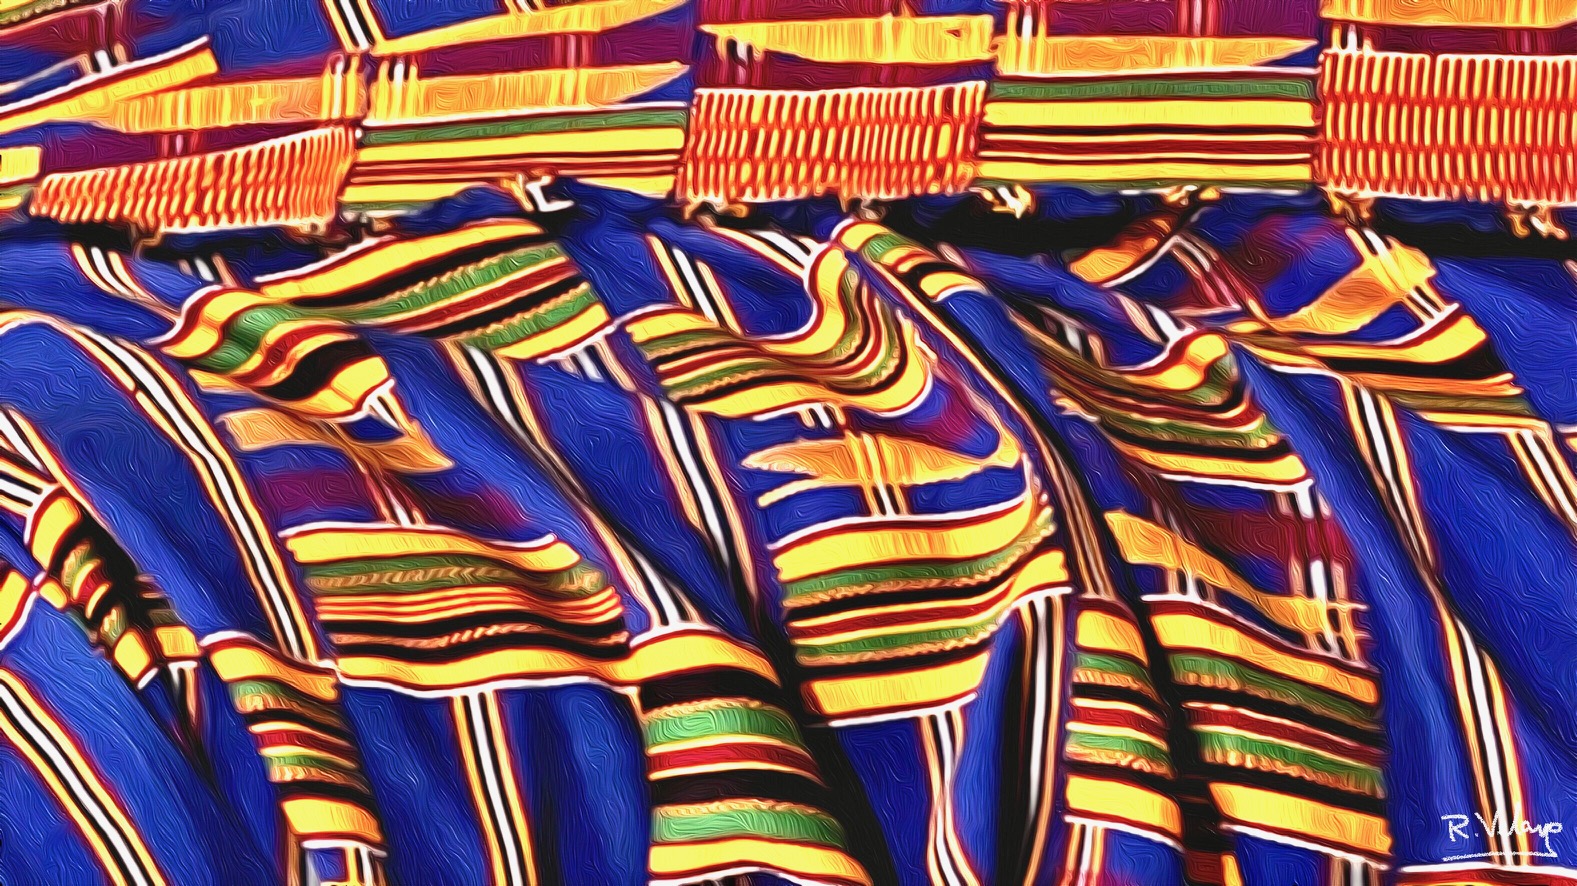 "AFRICAN-STYLE PATTERN TEXTILE" [Created: 6/30/2022]